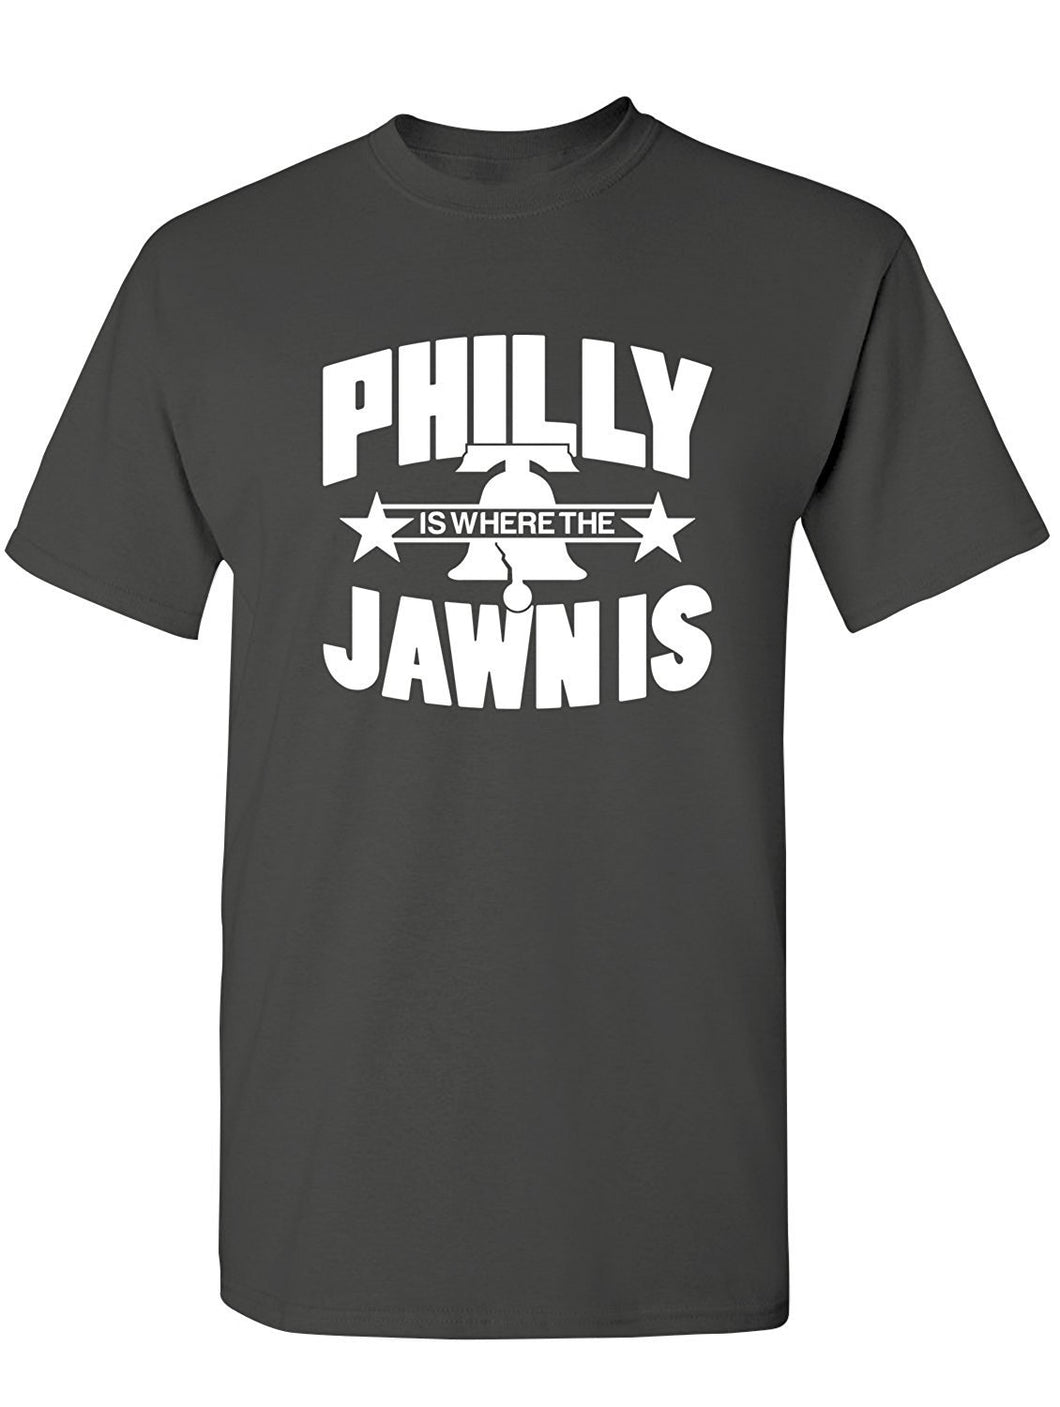 Manateez Men's Liberty Bell Philly Jawn Is Tee Shirt